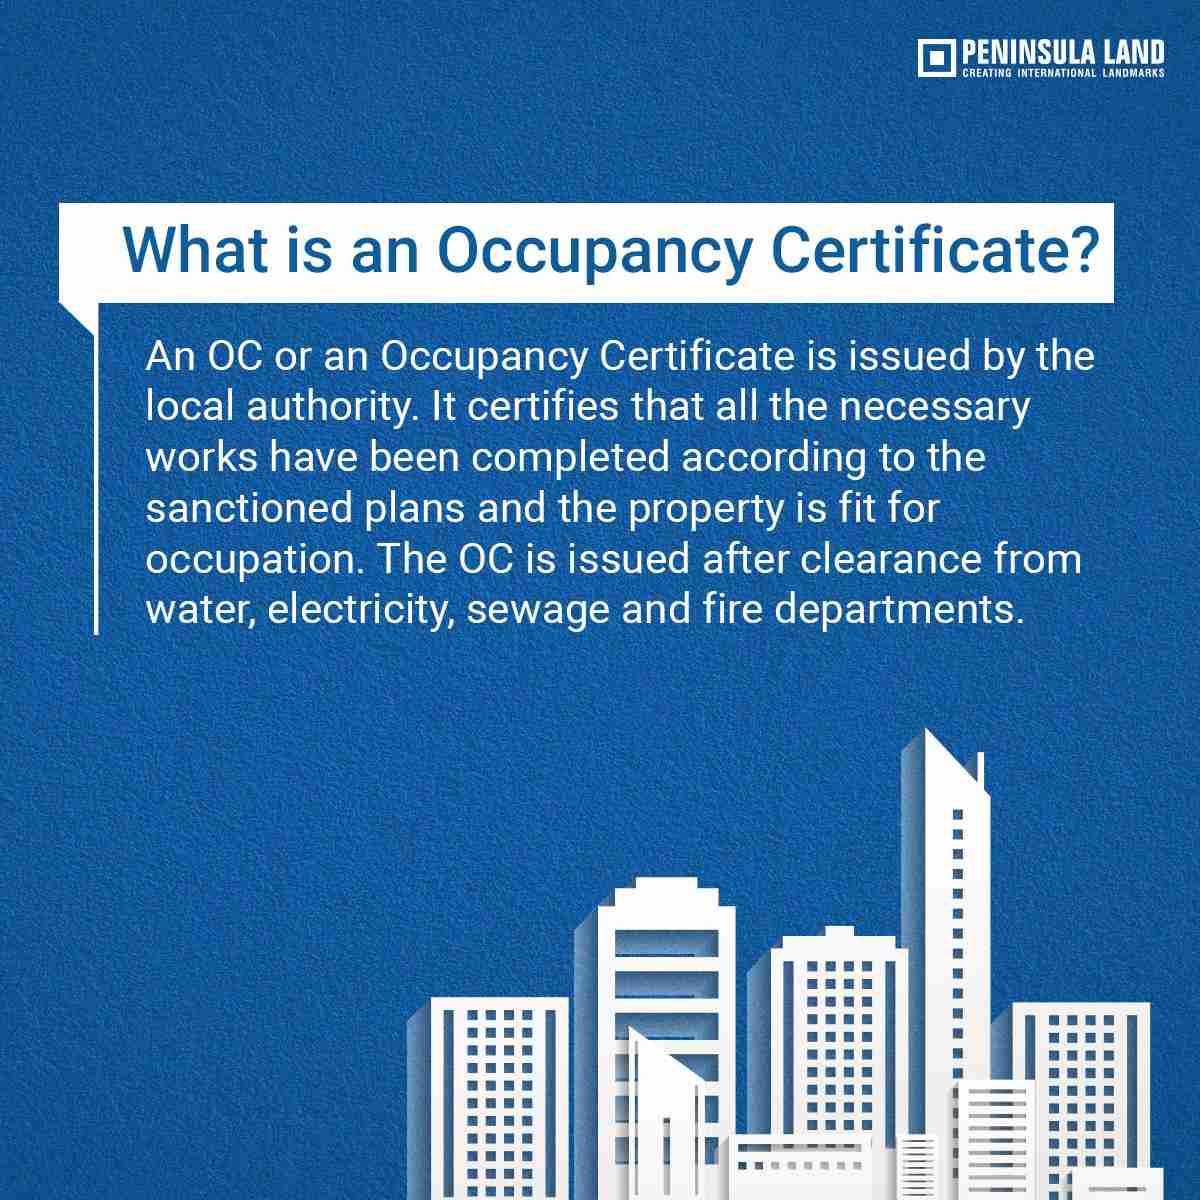 What is Occupancy Certificate?